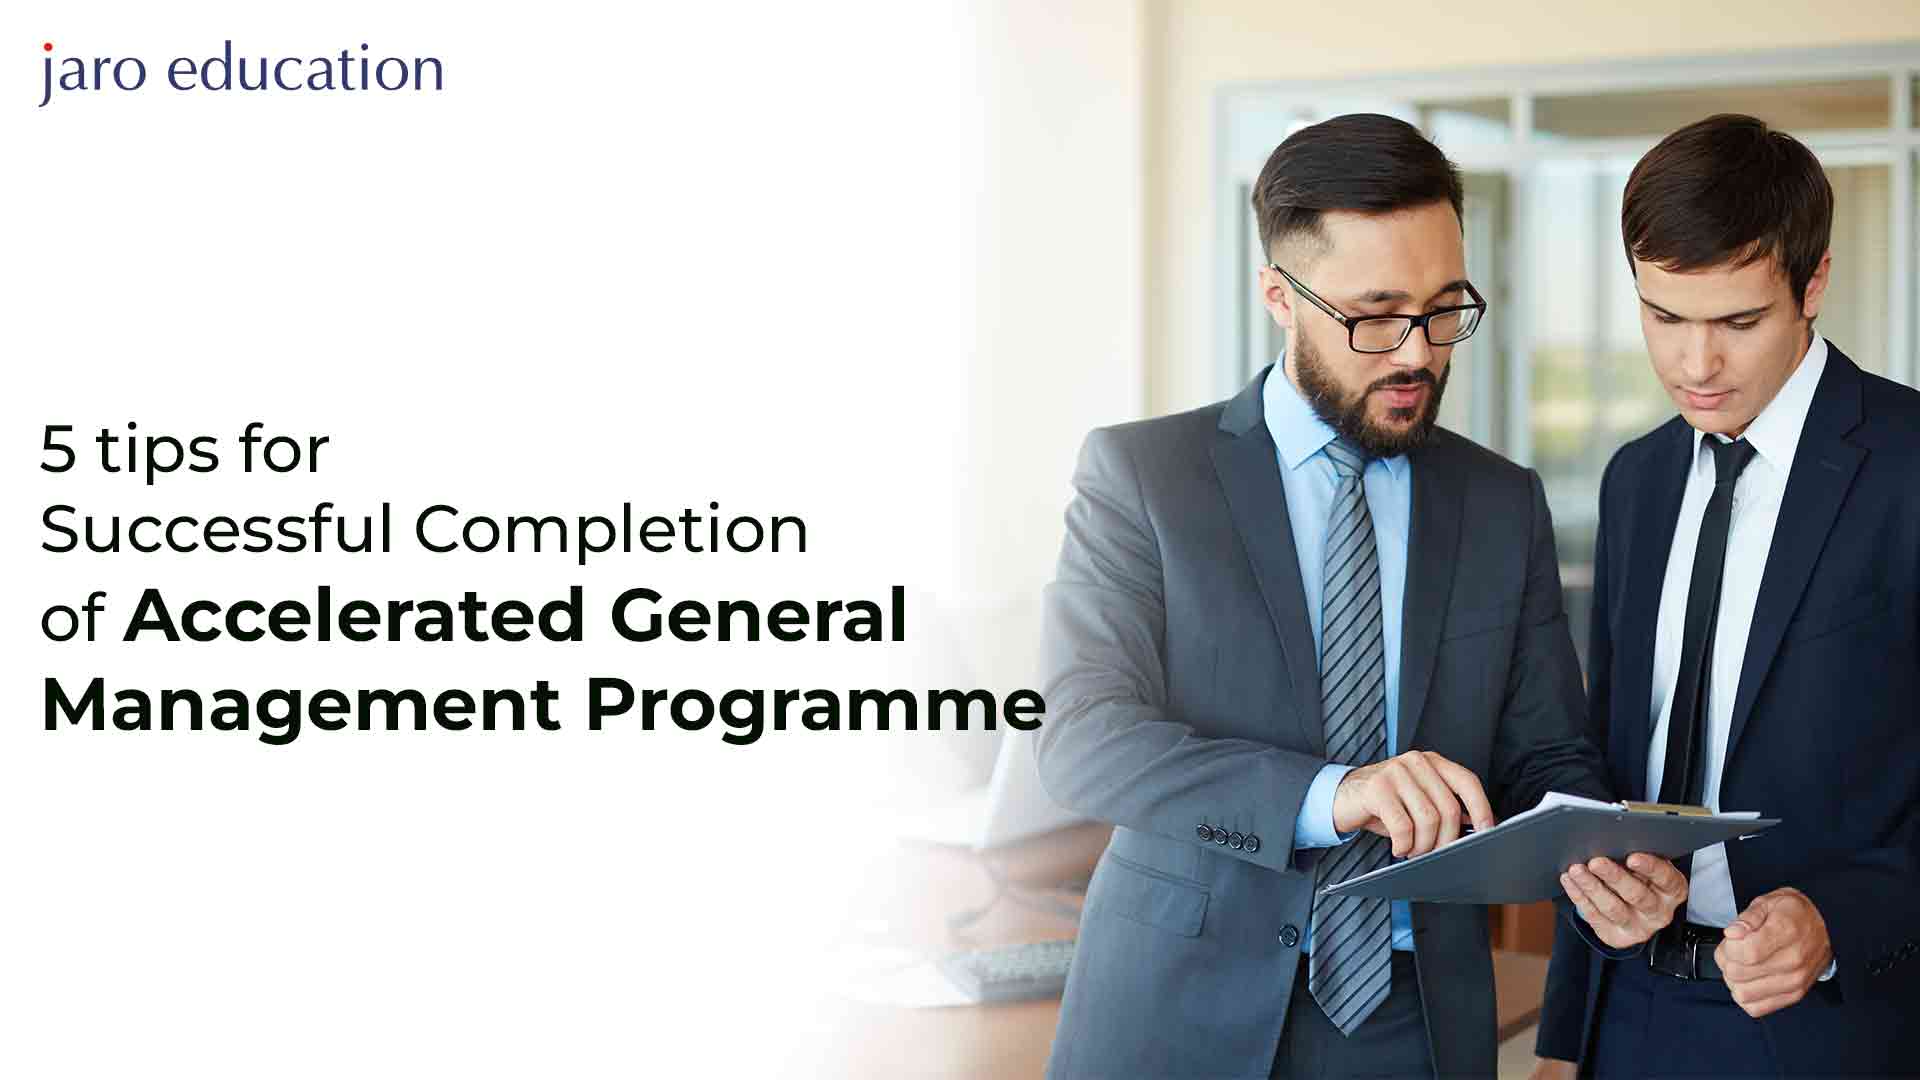 5-tips-for-Successful-Completion-of-Accelerated-General-Management-Programme jaro